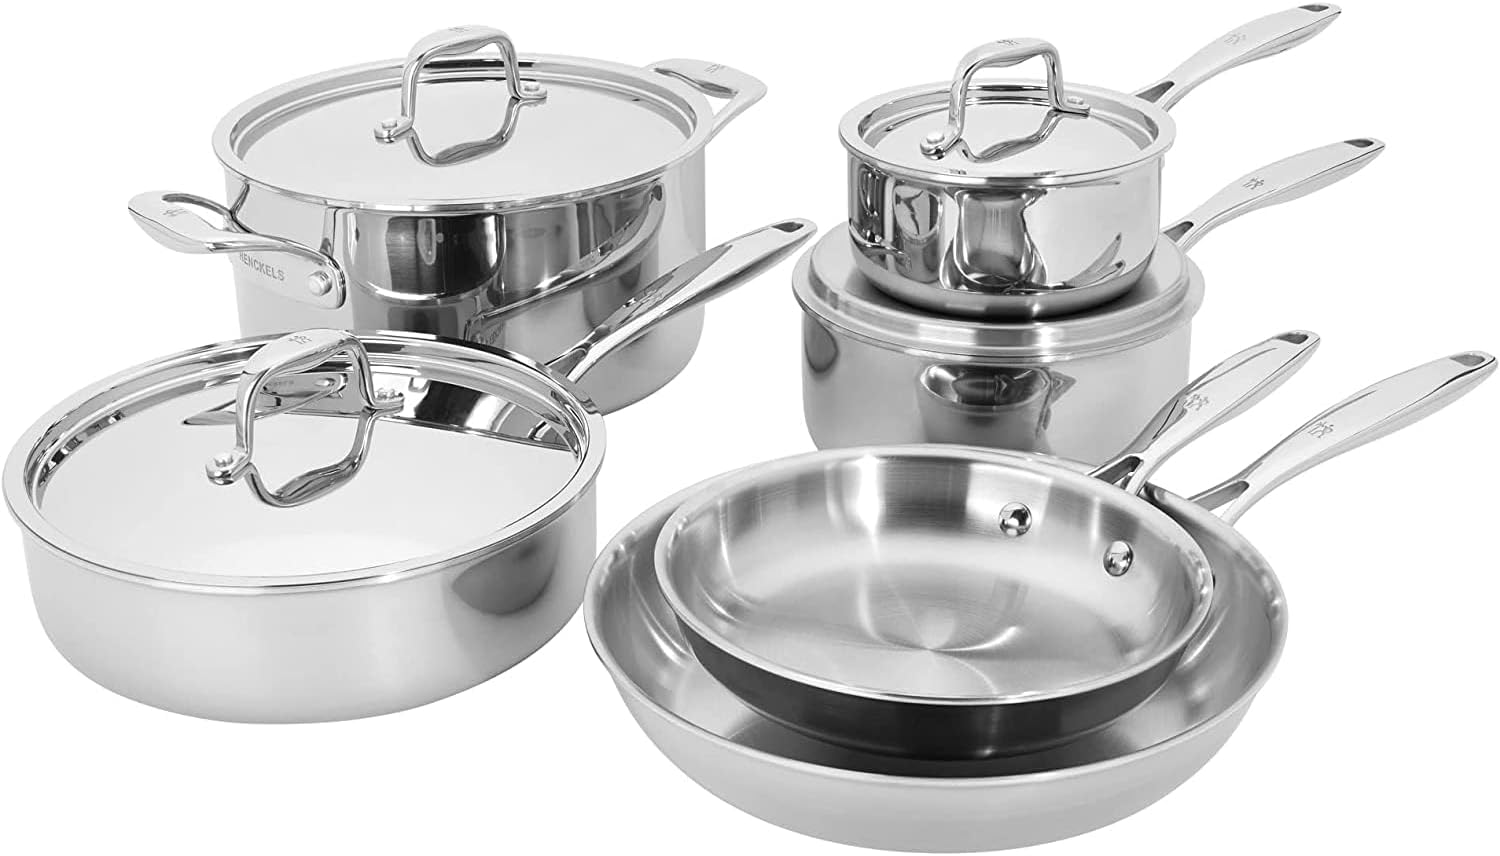 HENCKELS-Clad-Impulse-10-pc-3-Ply-Stainless-Steel-Pots-and-Pans-Set-Cookware-Set